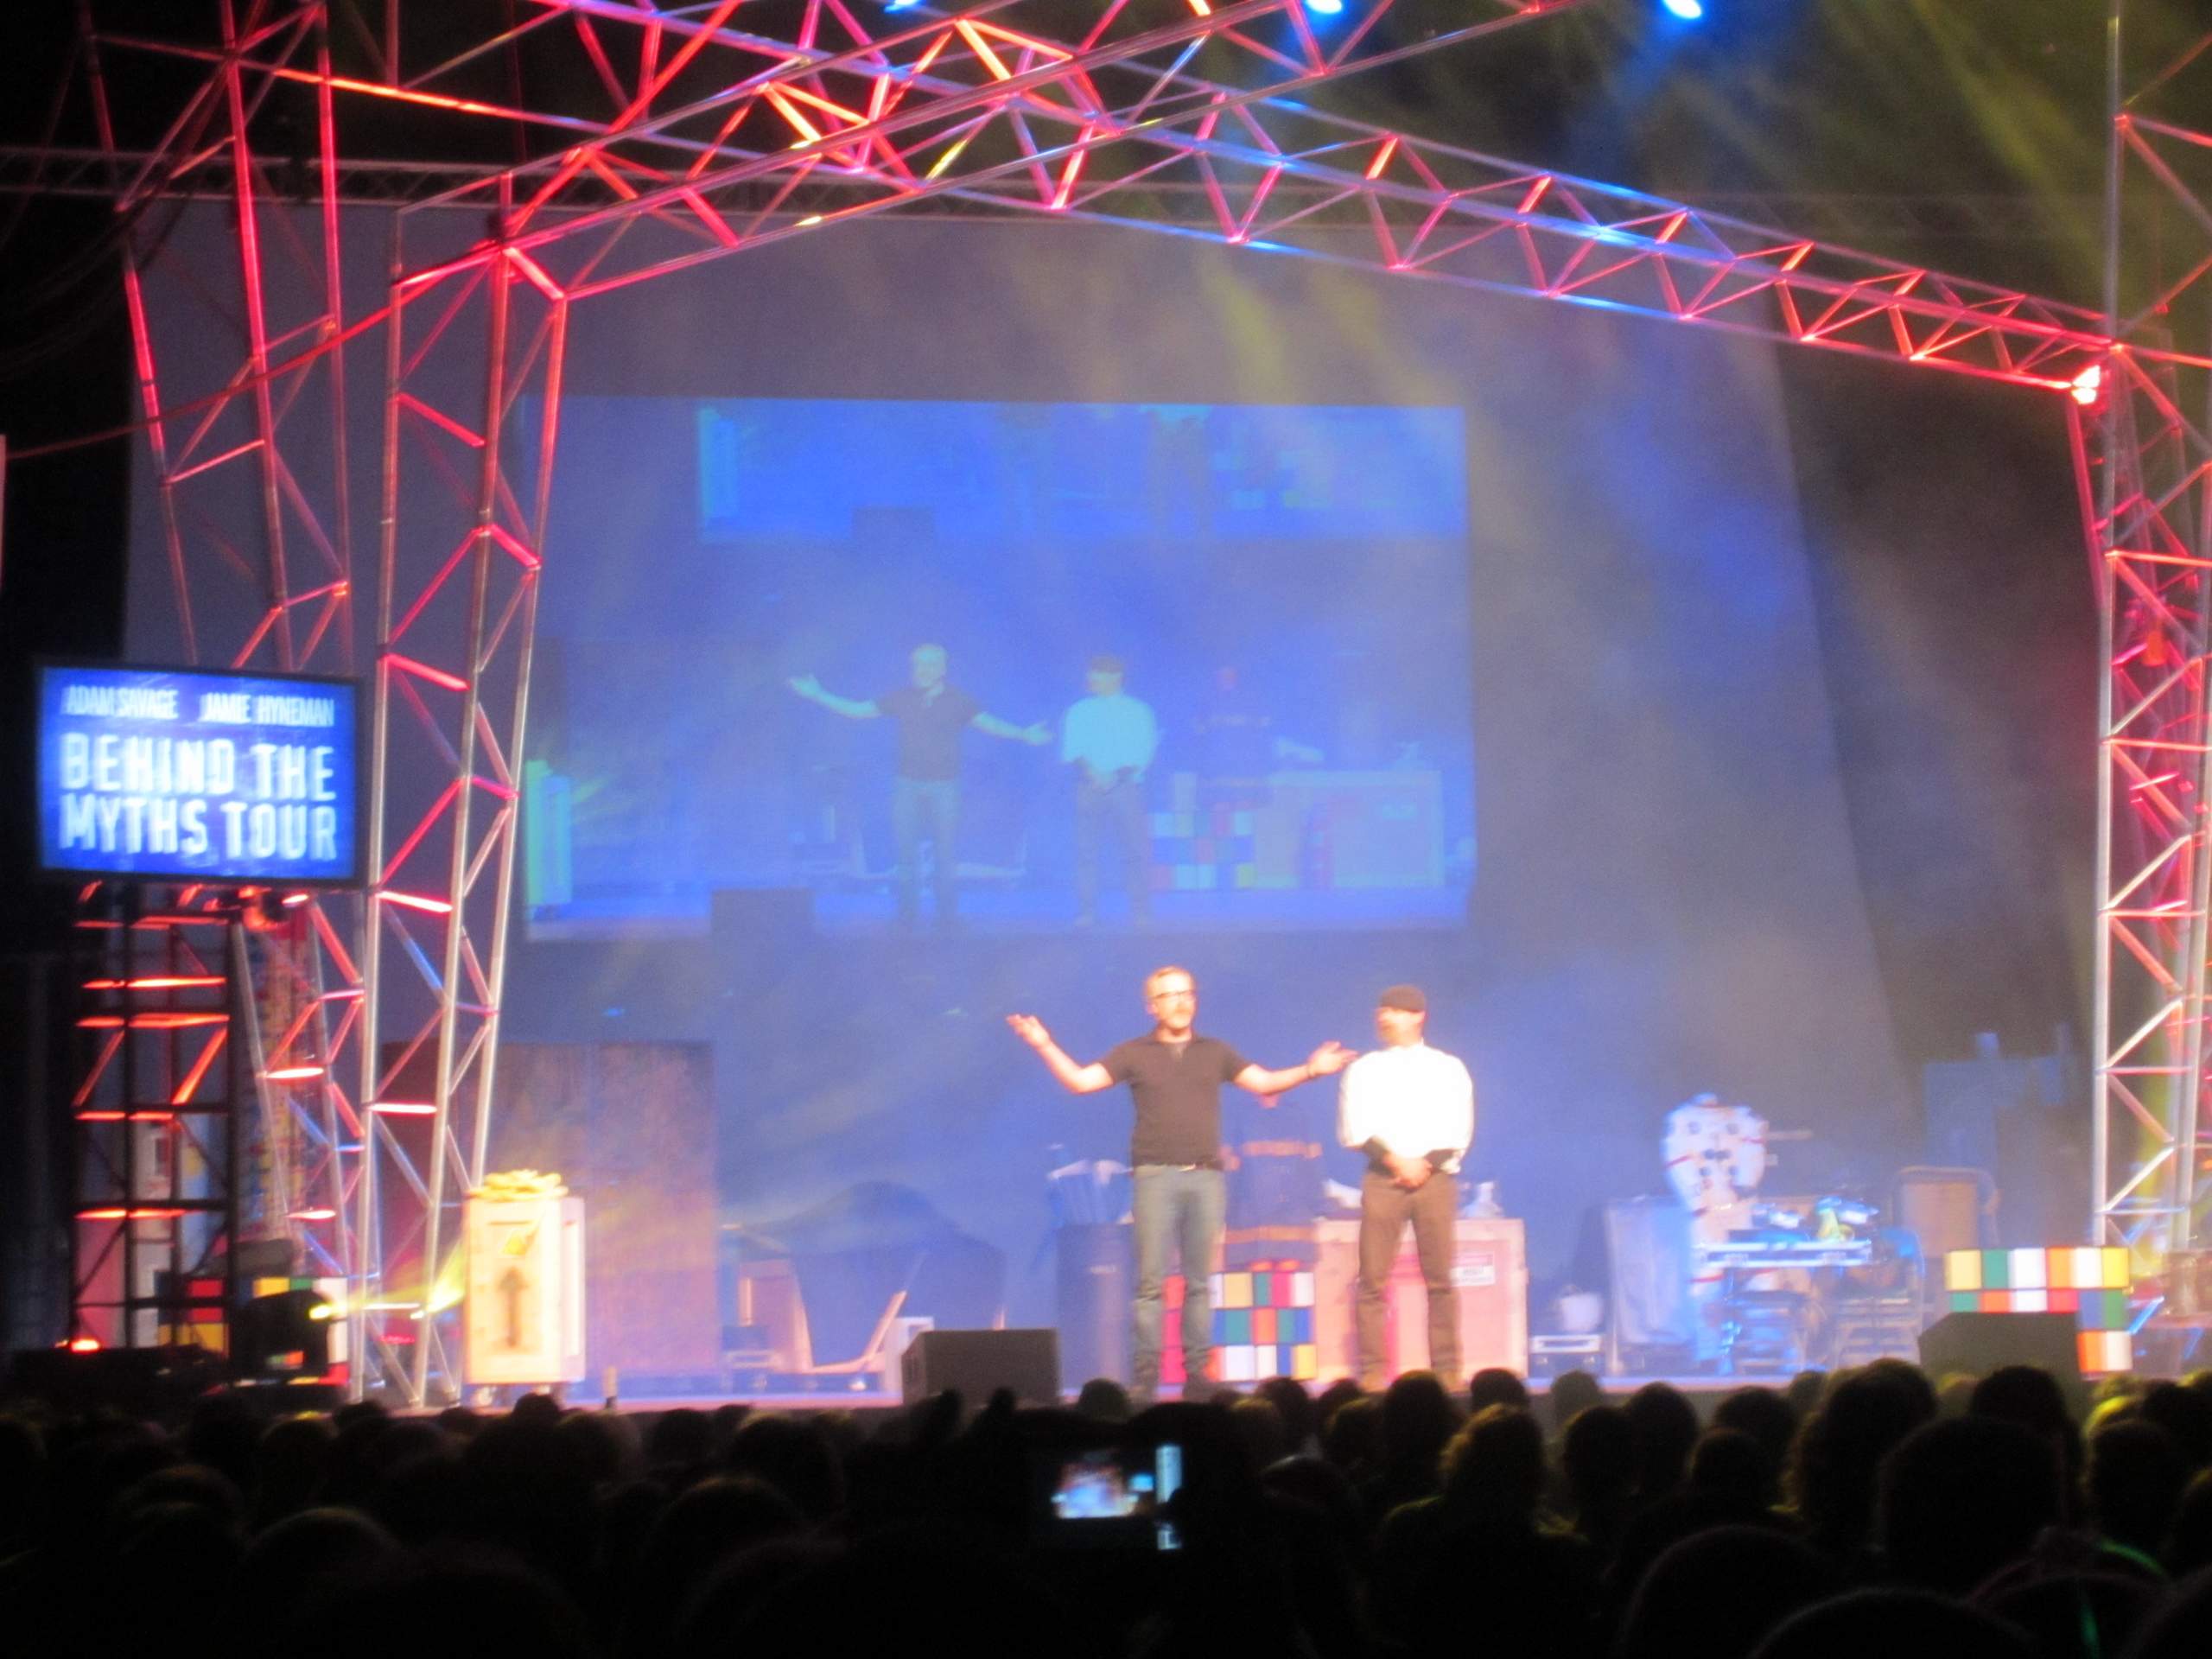 The start of the Behind the Myths Tour with Mythbusters Adam and Jamie.